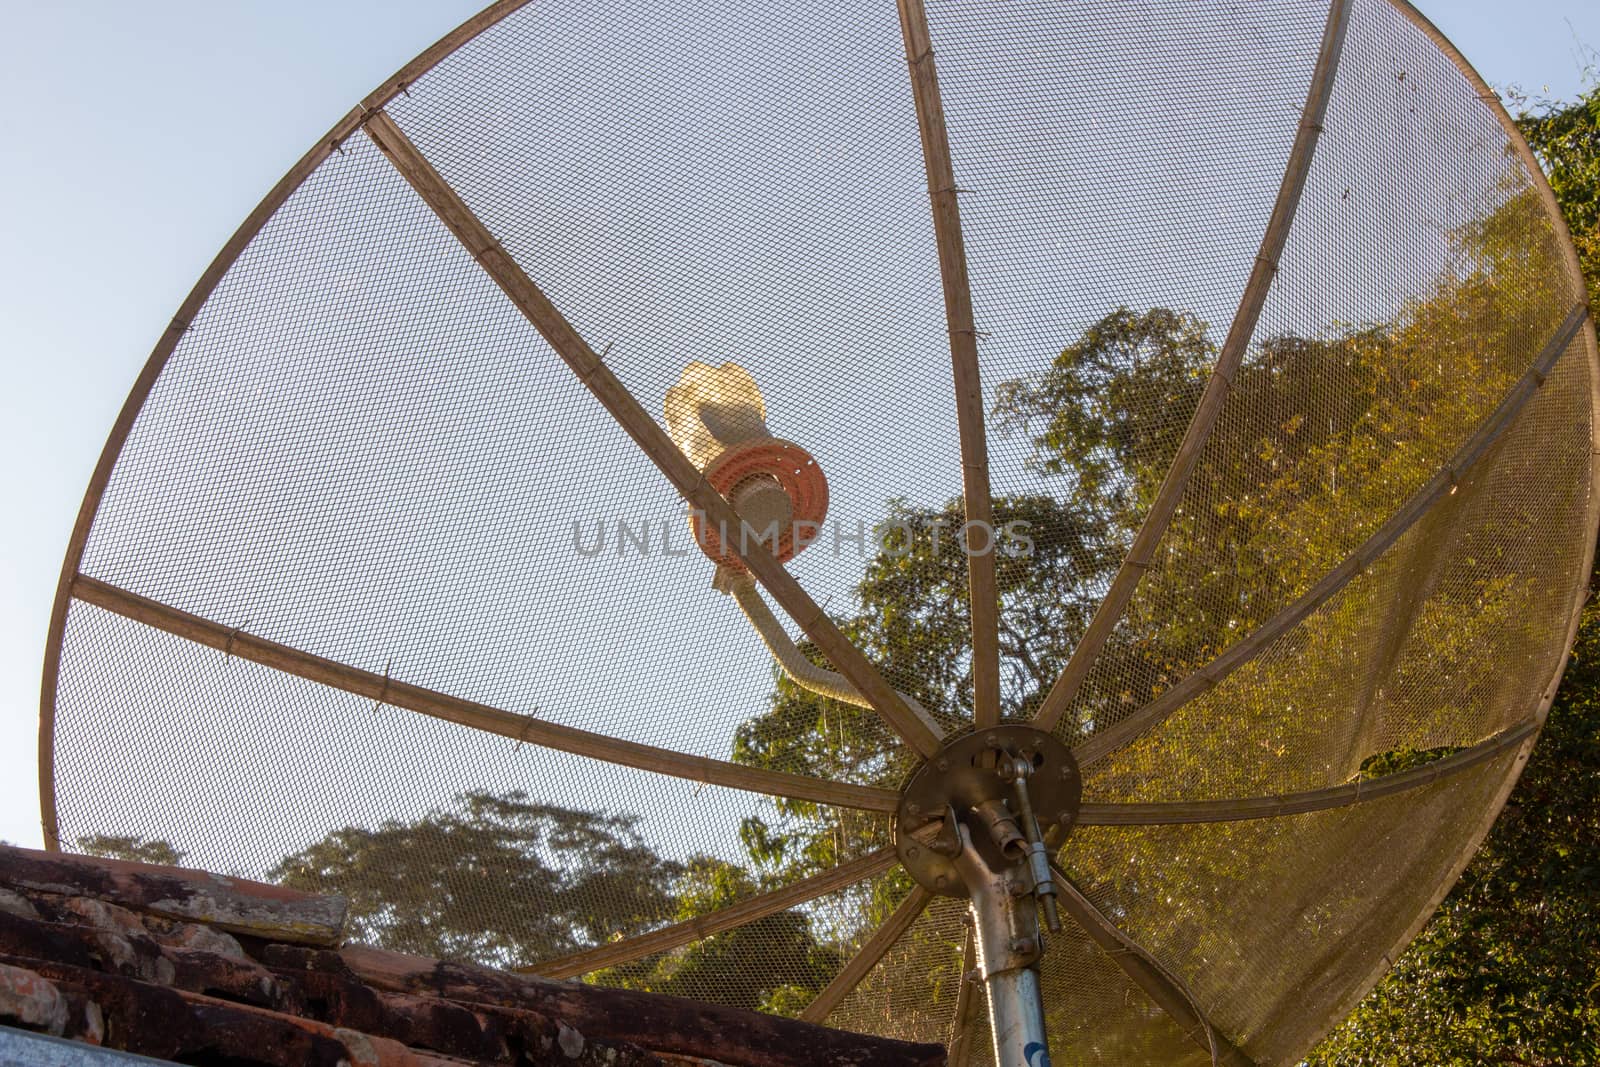 Parabolic antenna for receive TV signal from satellites